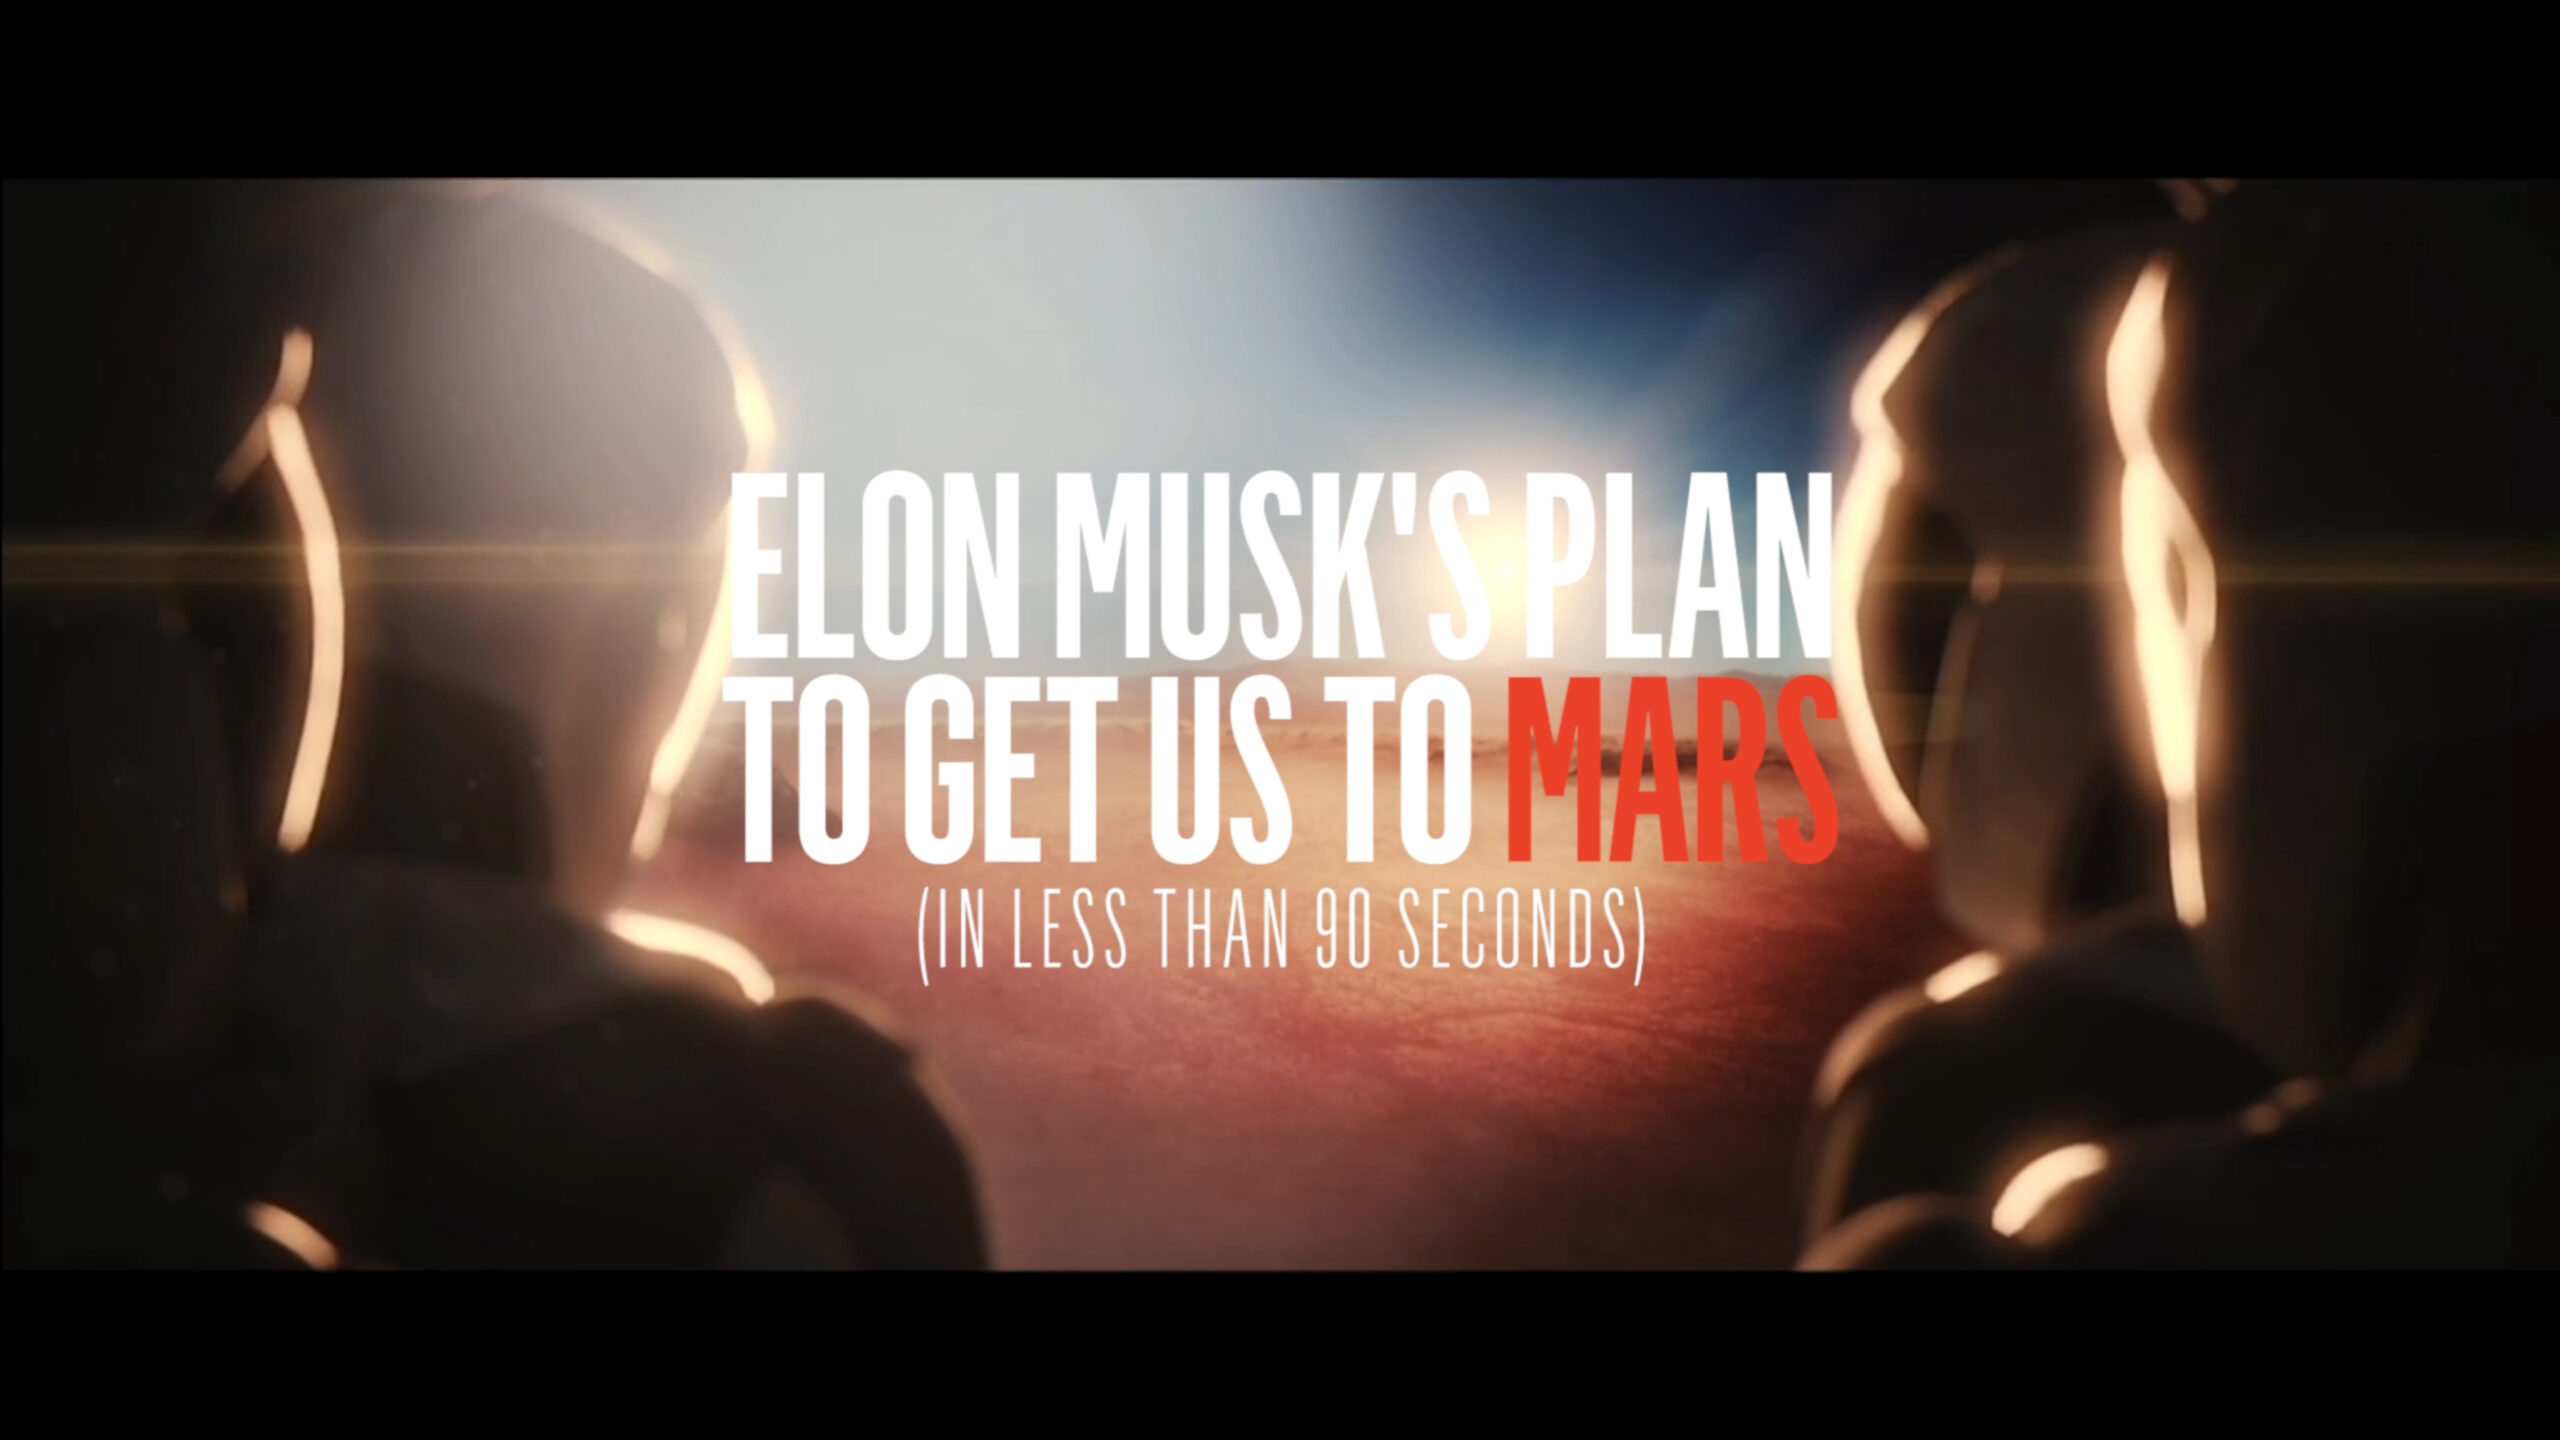 Elon Musk’s Plan To Get Us To Mars (In Less Than 90 Seconds)